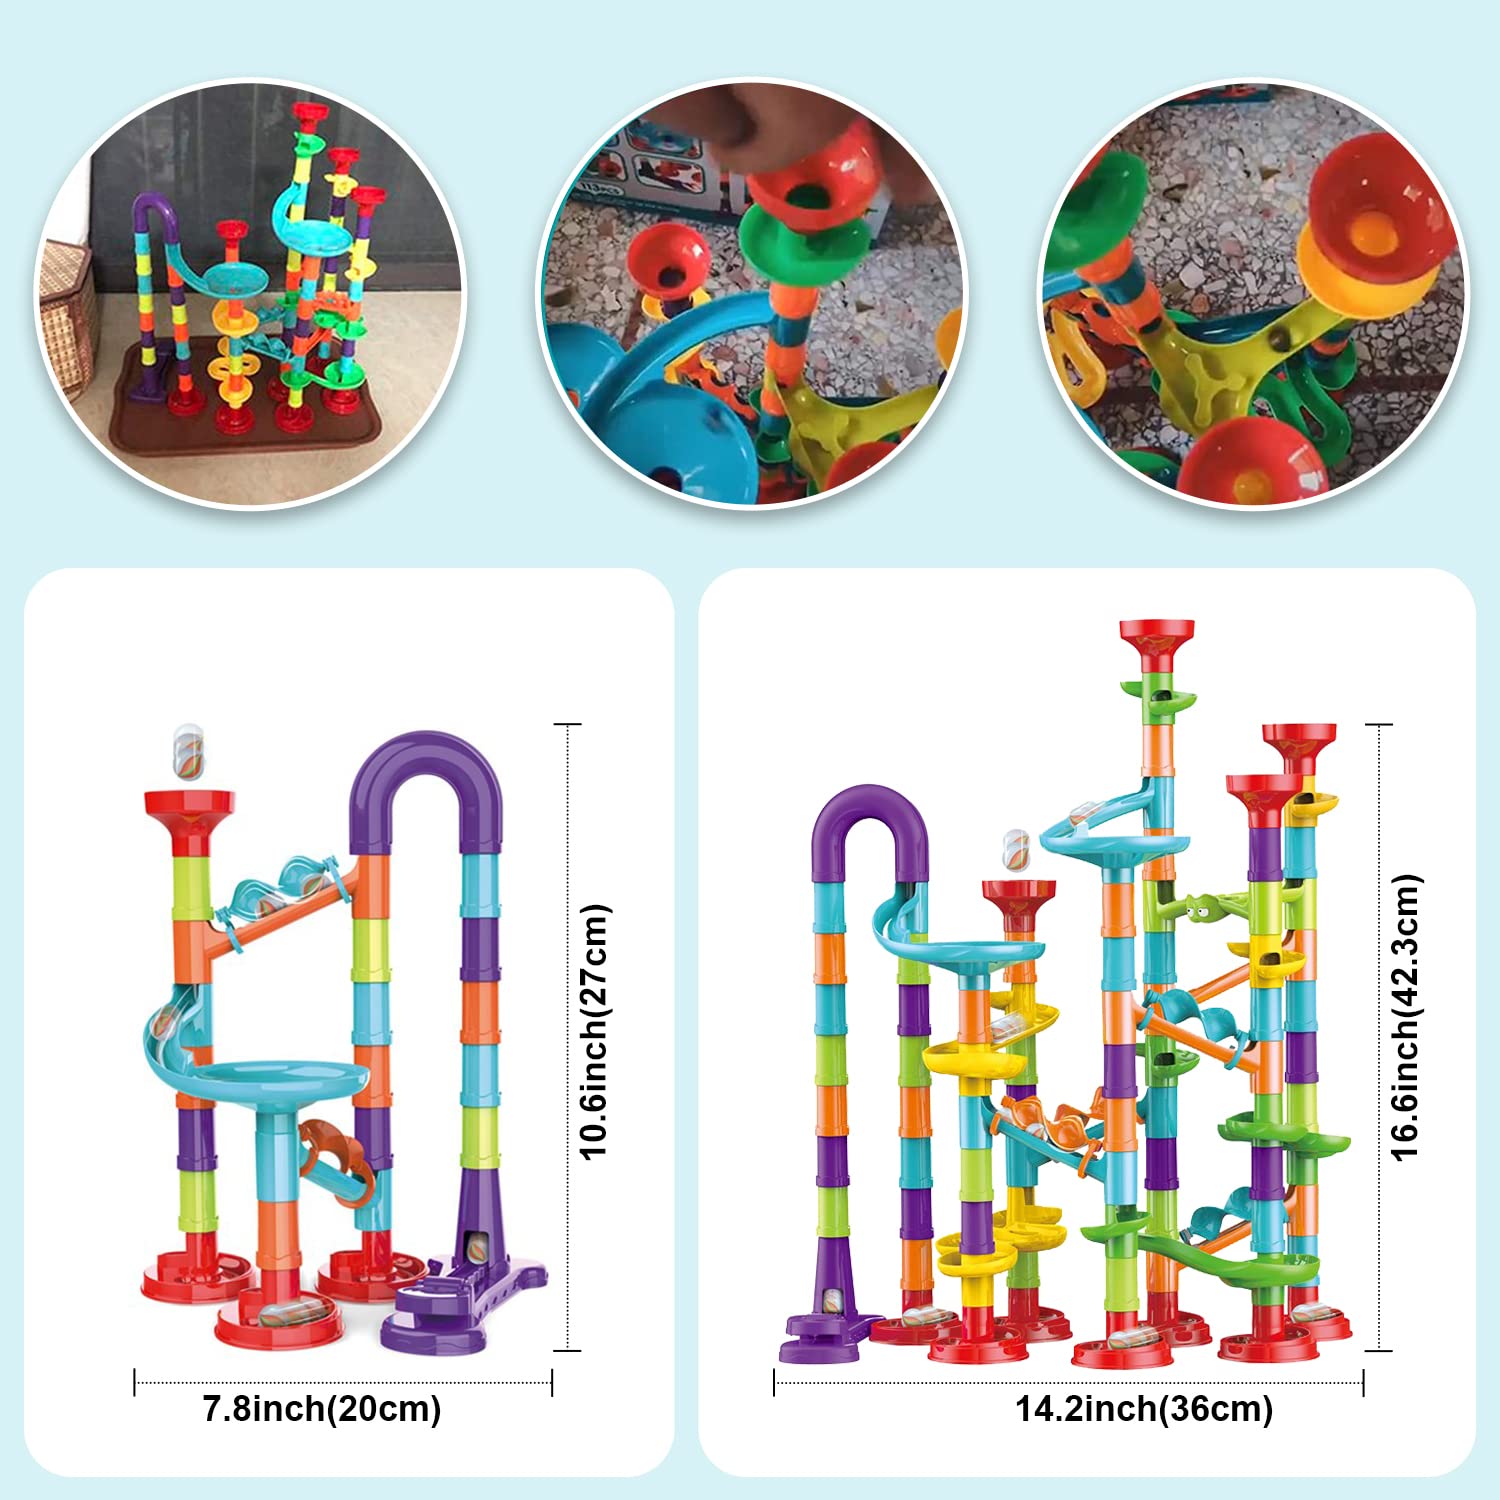 Marble Run for Kids Ages 4-8 - Maze Game DIY Educational Playset Birthday Gift for Ages 3+,Track Pipe Building Blocks Glass Marbles for Kids Birth Day Preschool, Toys for 3 Year Old Boys Christmas